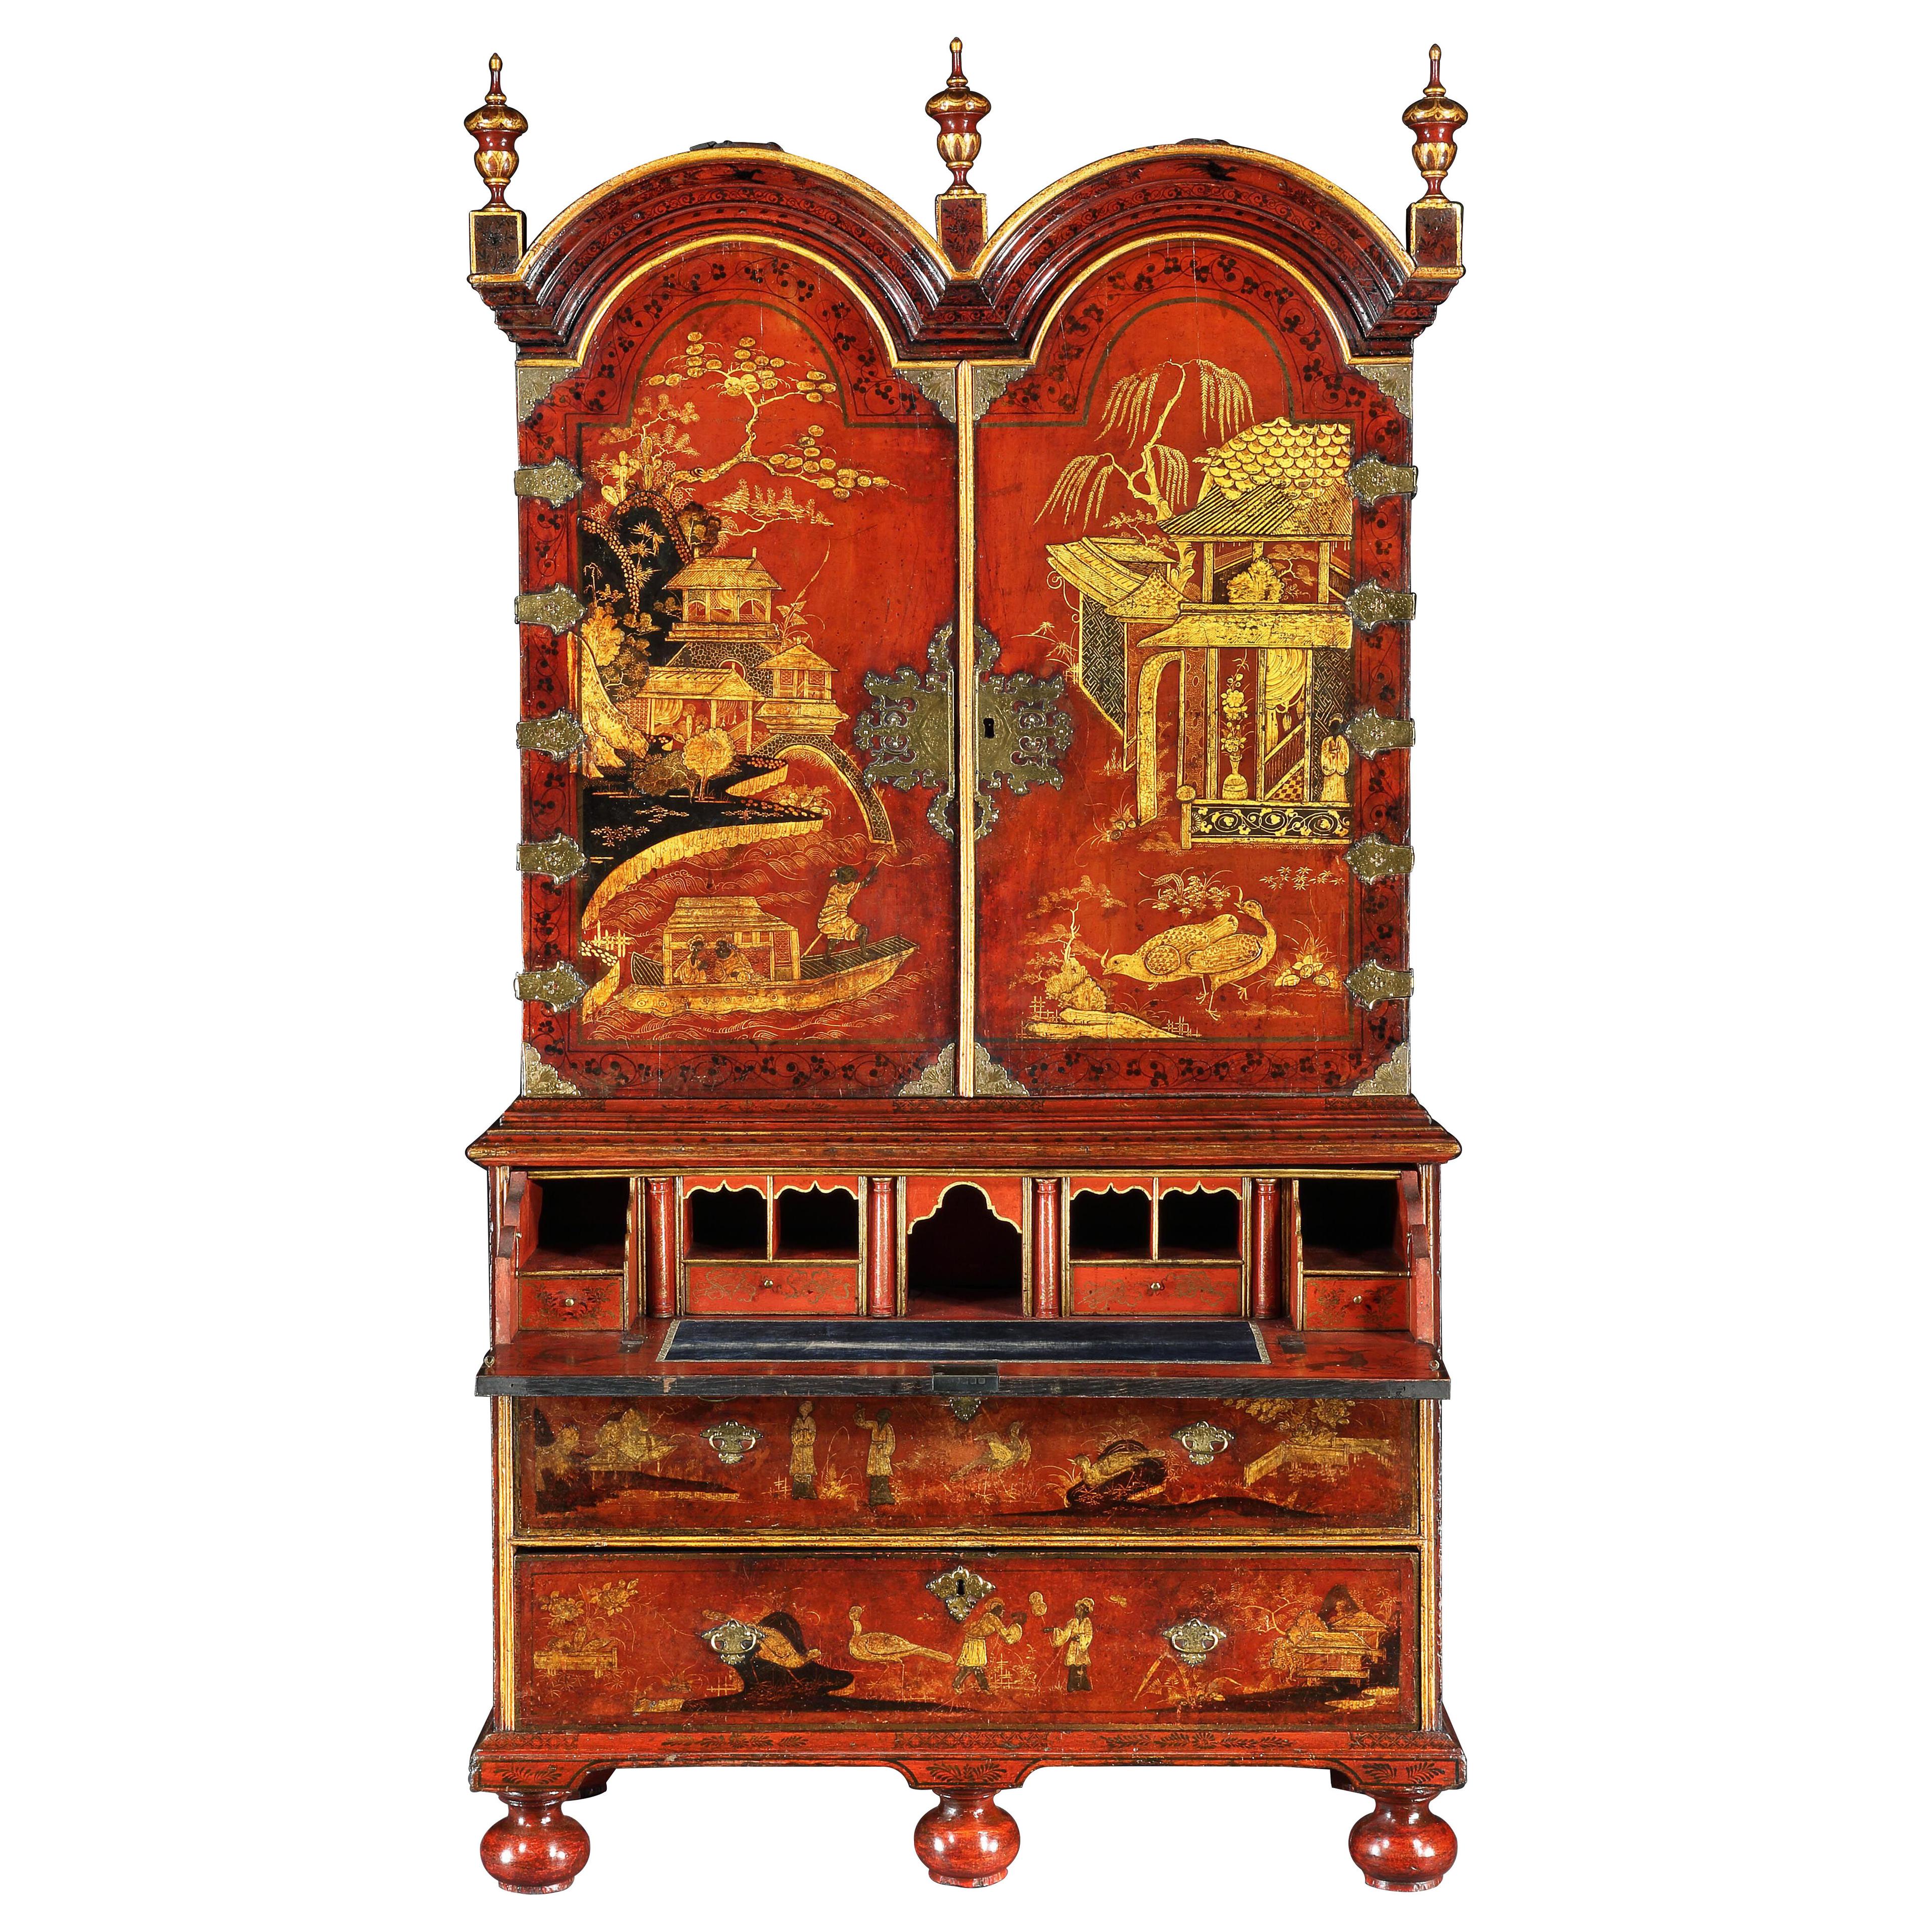 A Rare George I Period Scarlet Japanned Double Domed Cabinet by Giles Grendey